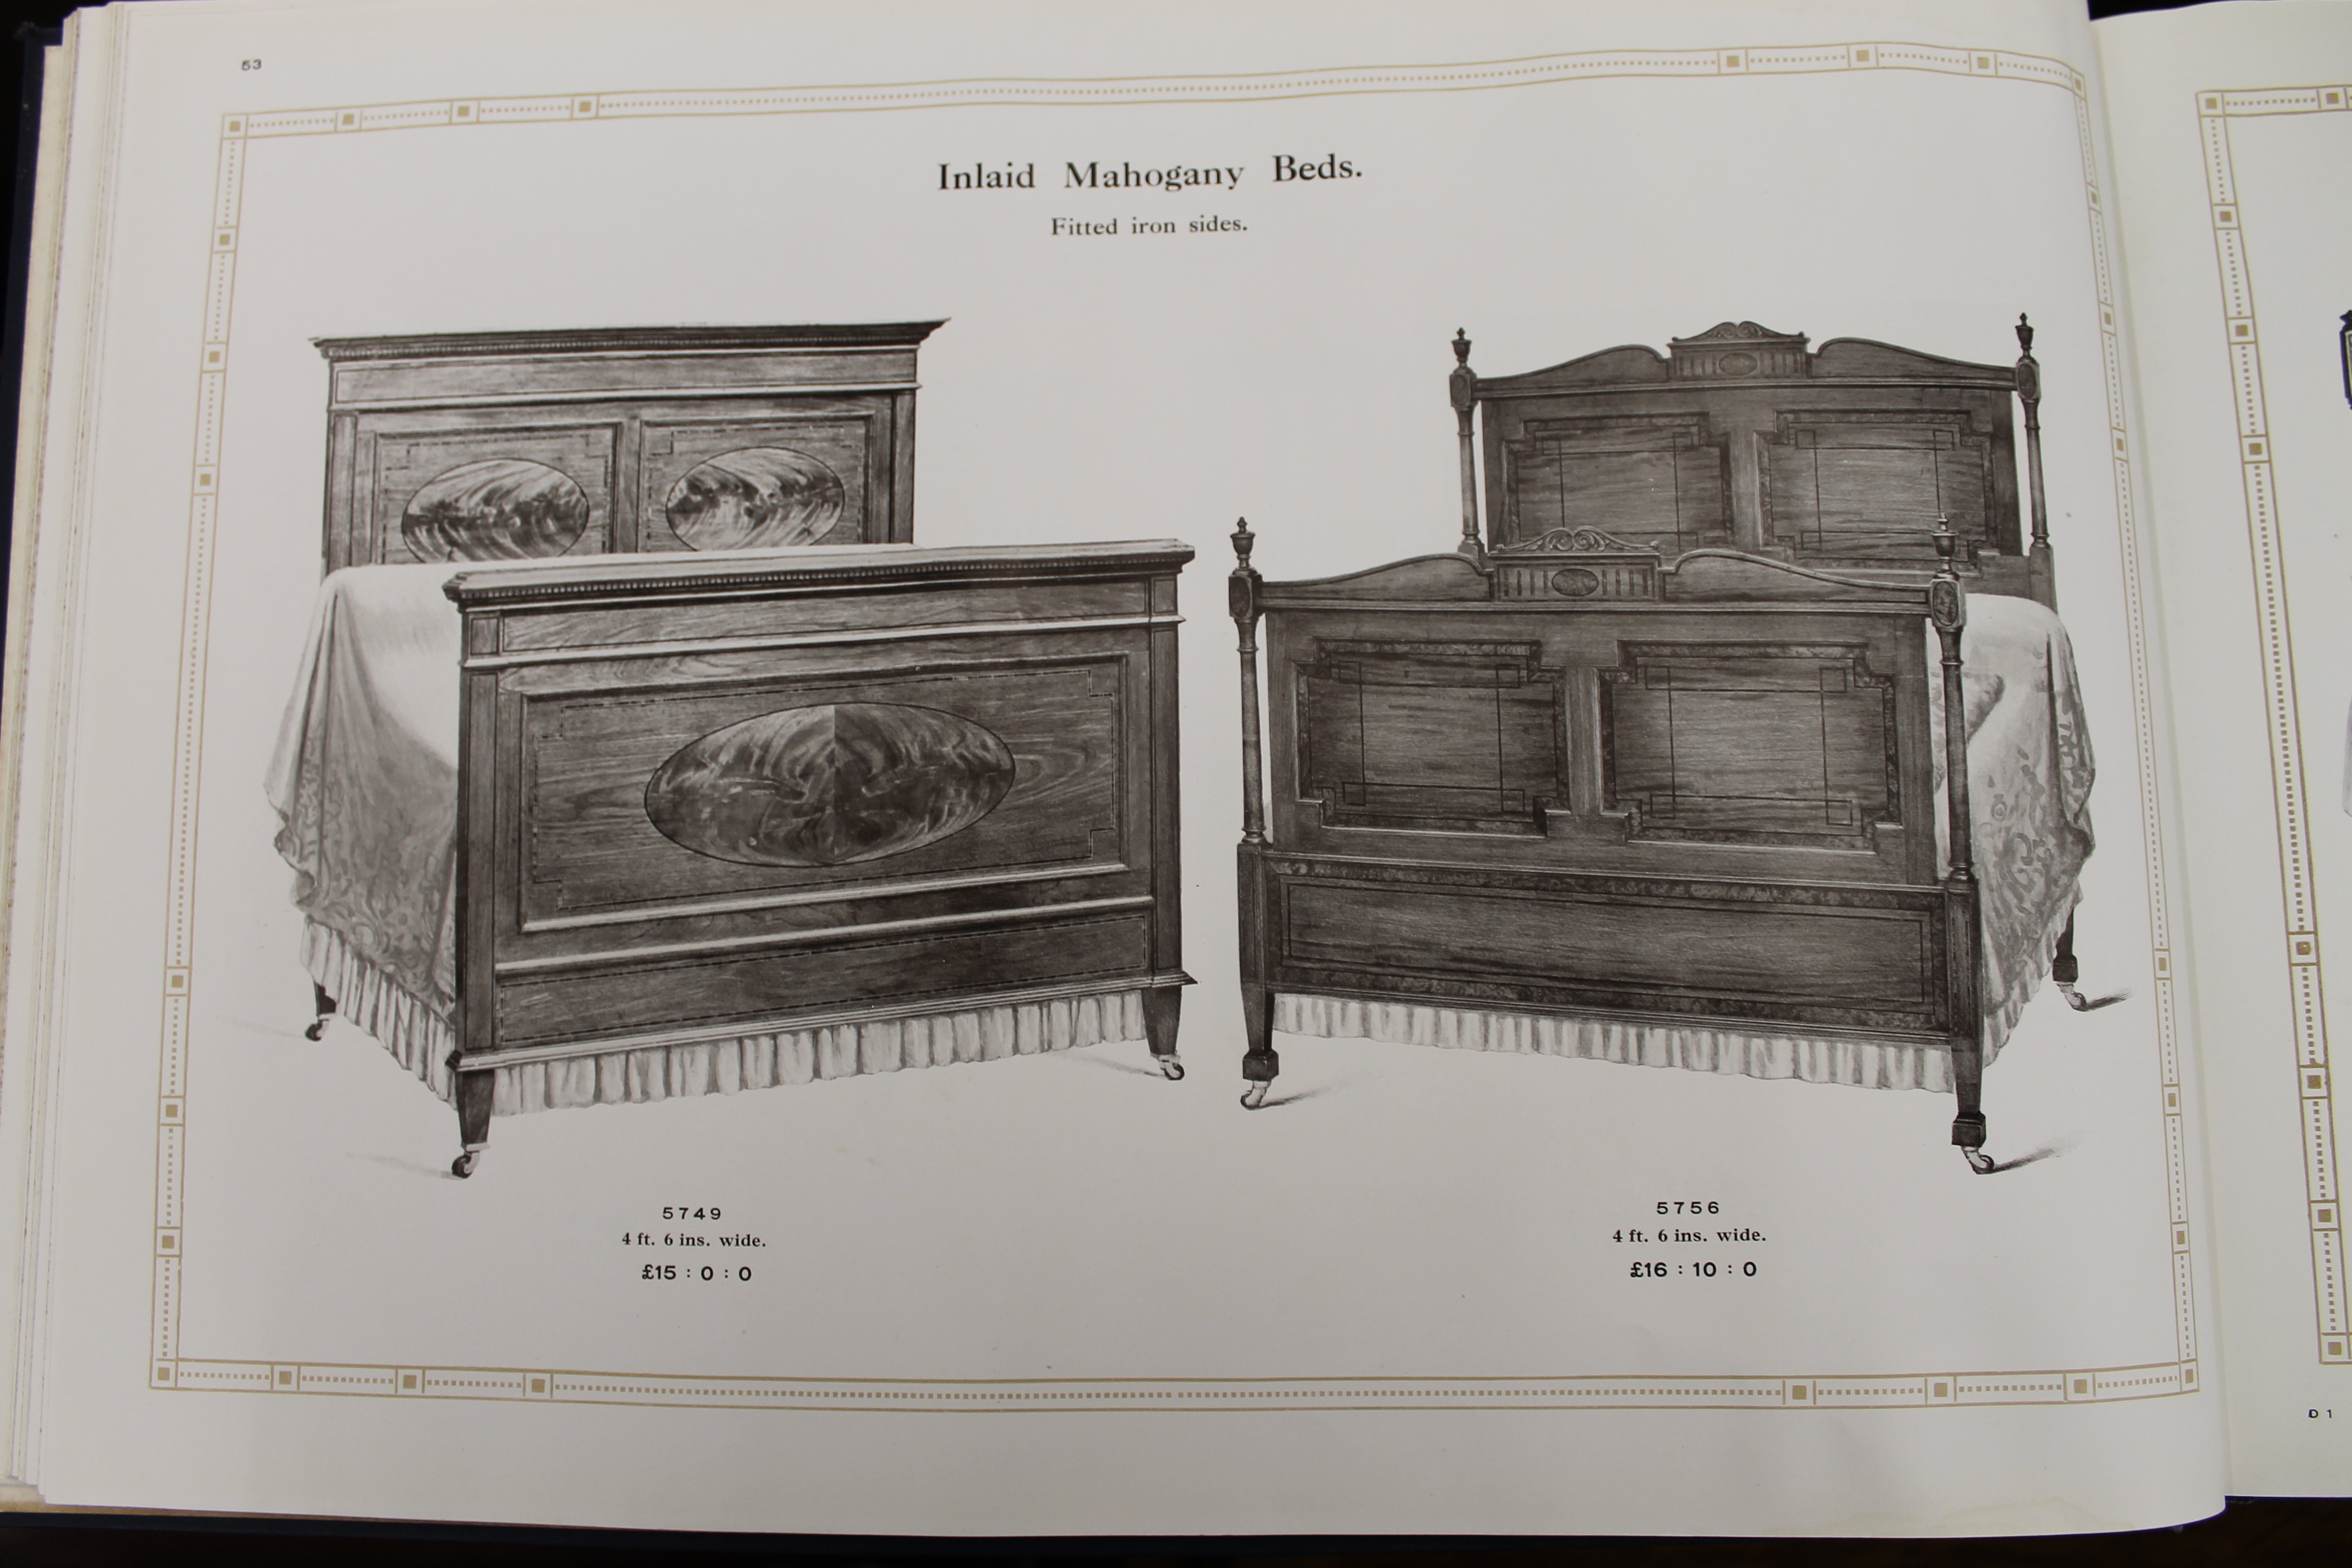 A Furniture Designs Ancient and Modern catalogue. - Image 9 of 10